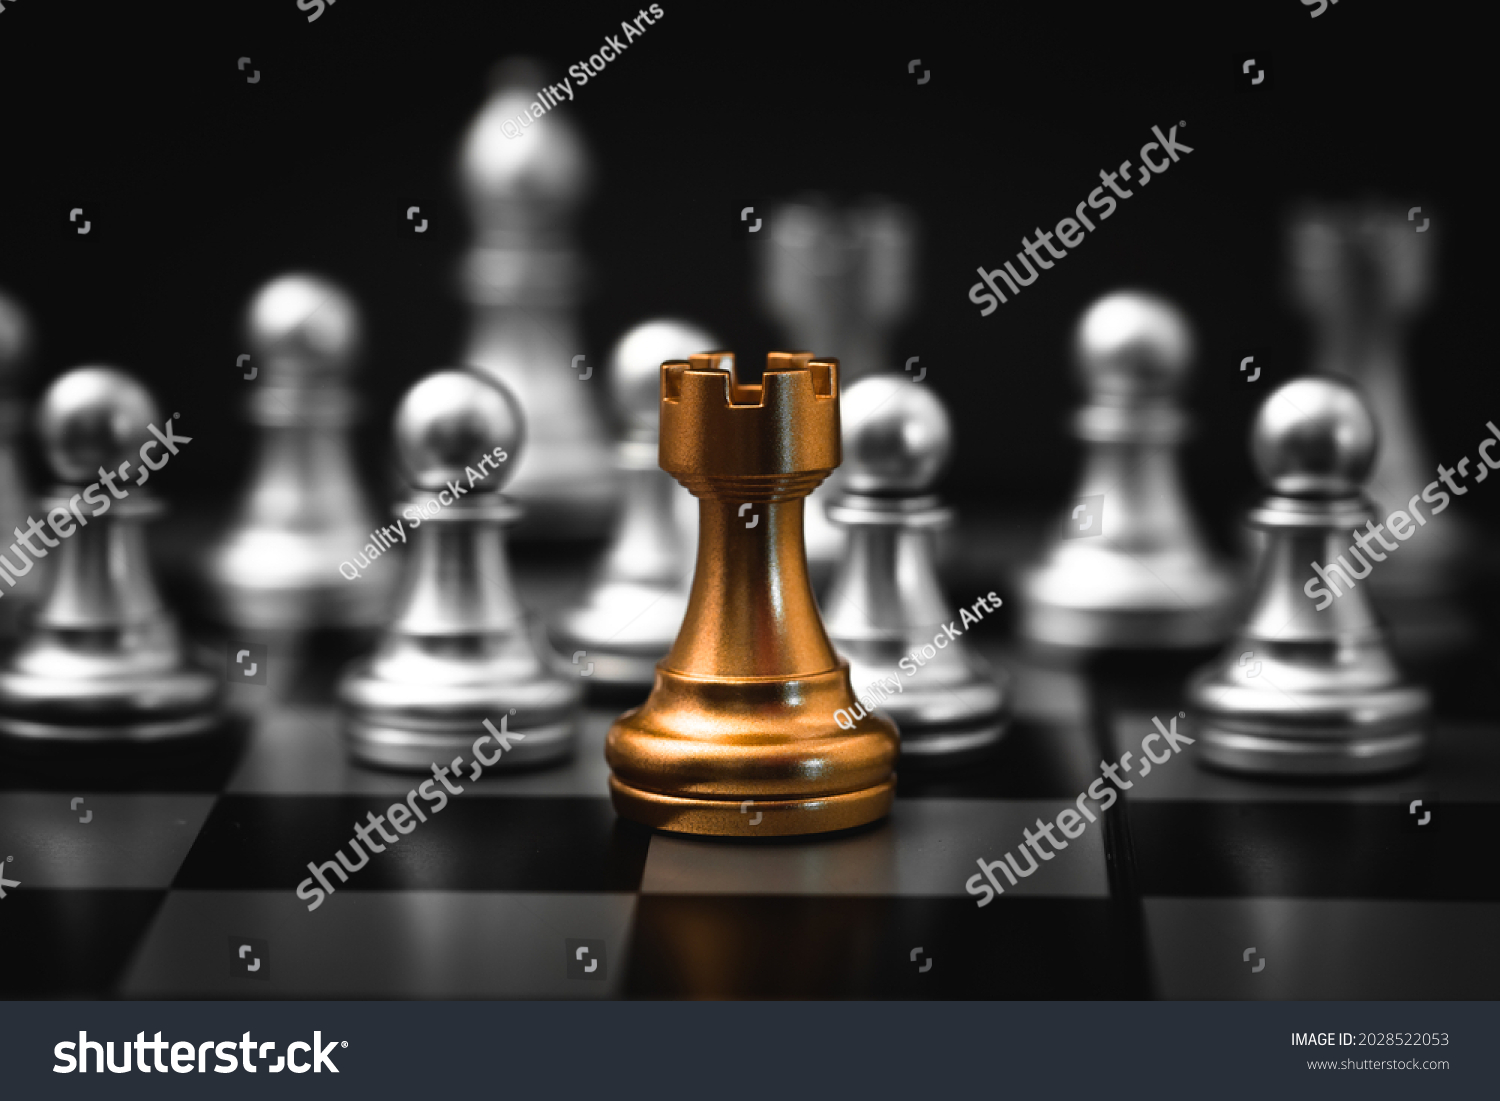 Gold Rook or Castle Tower Chess piece closeup on chess board game. Elite Company leader concept. #2028522053